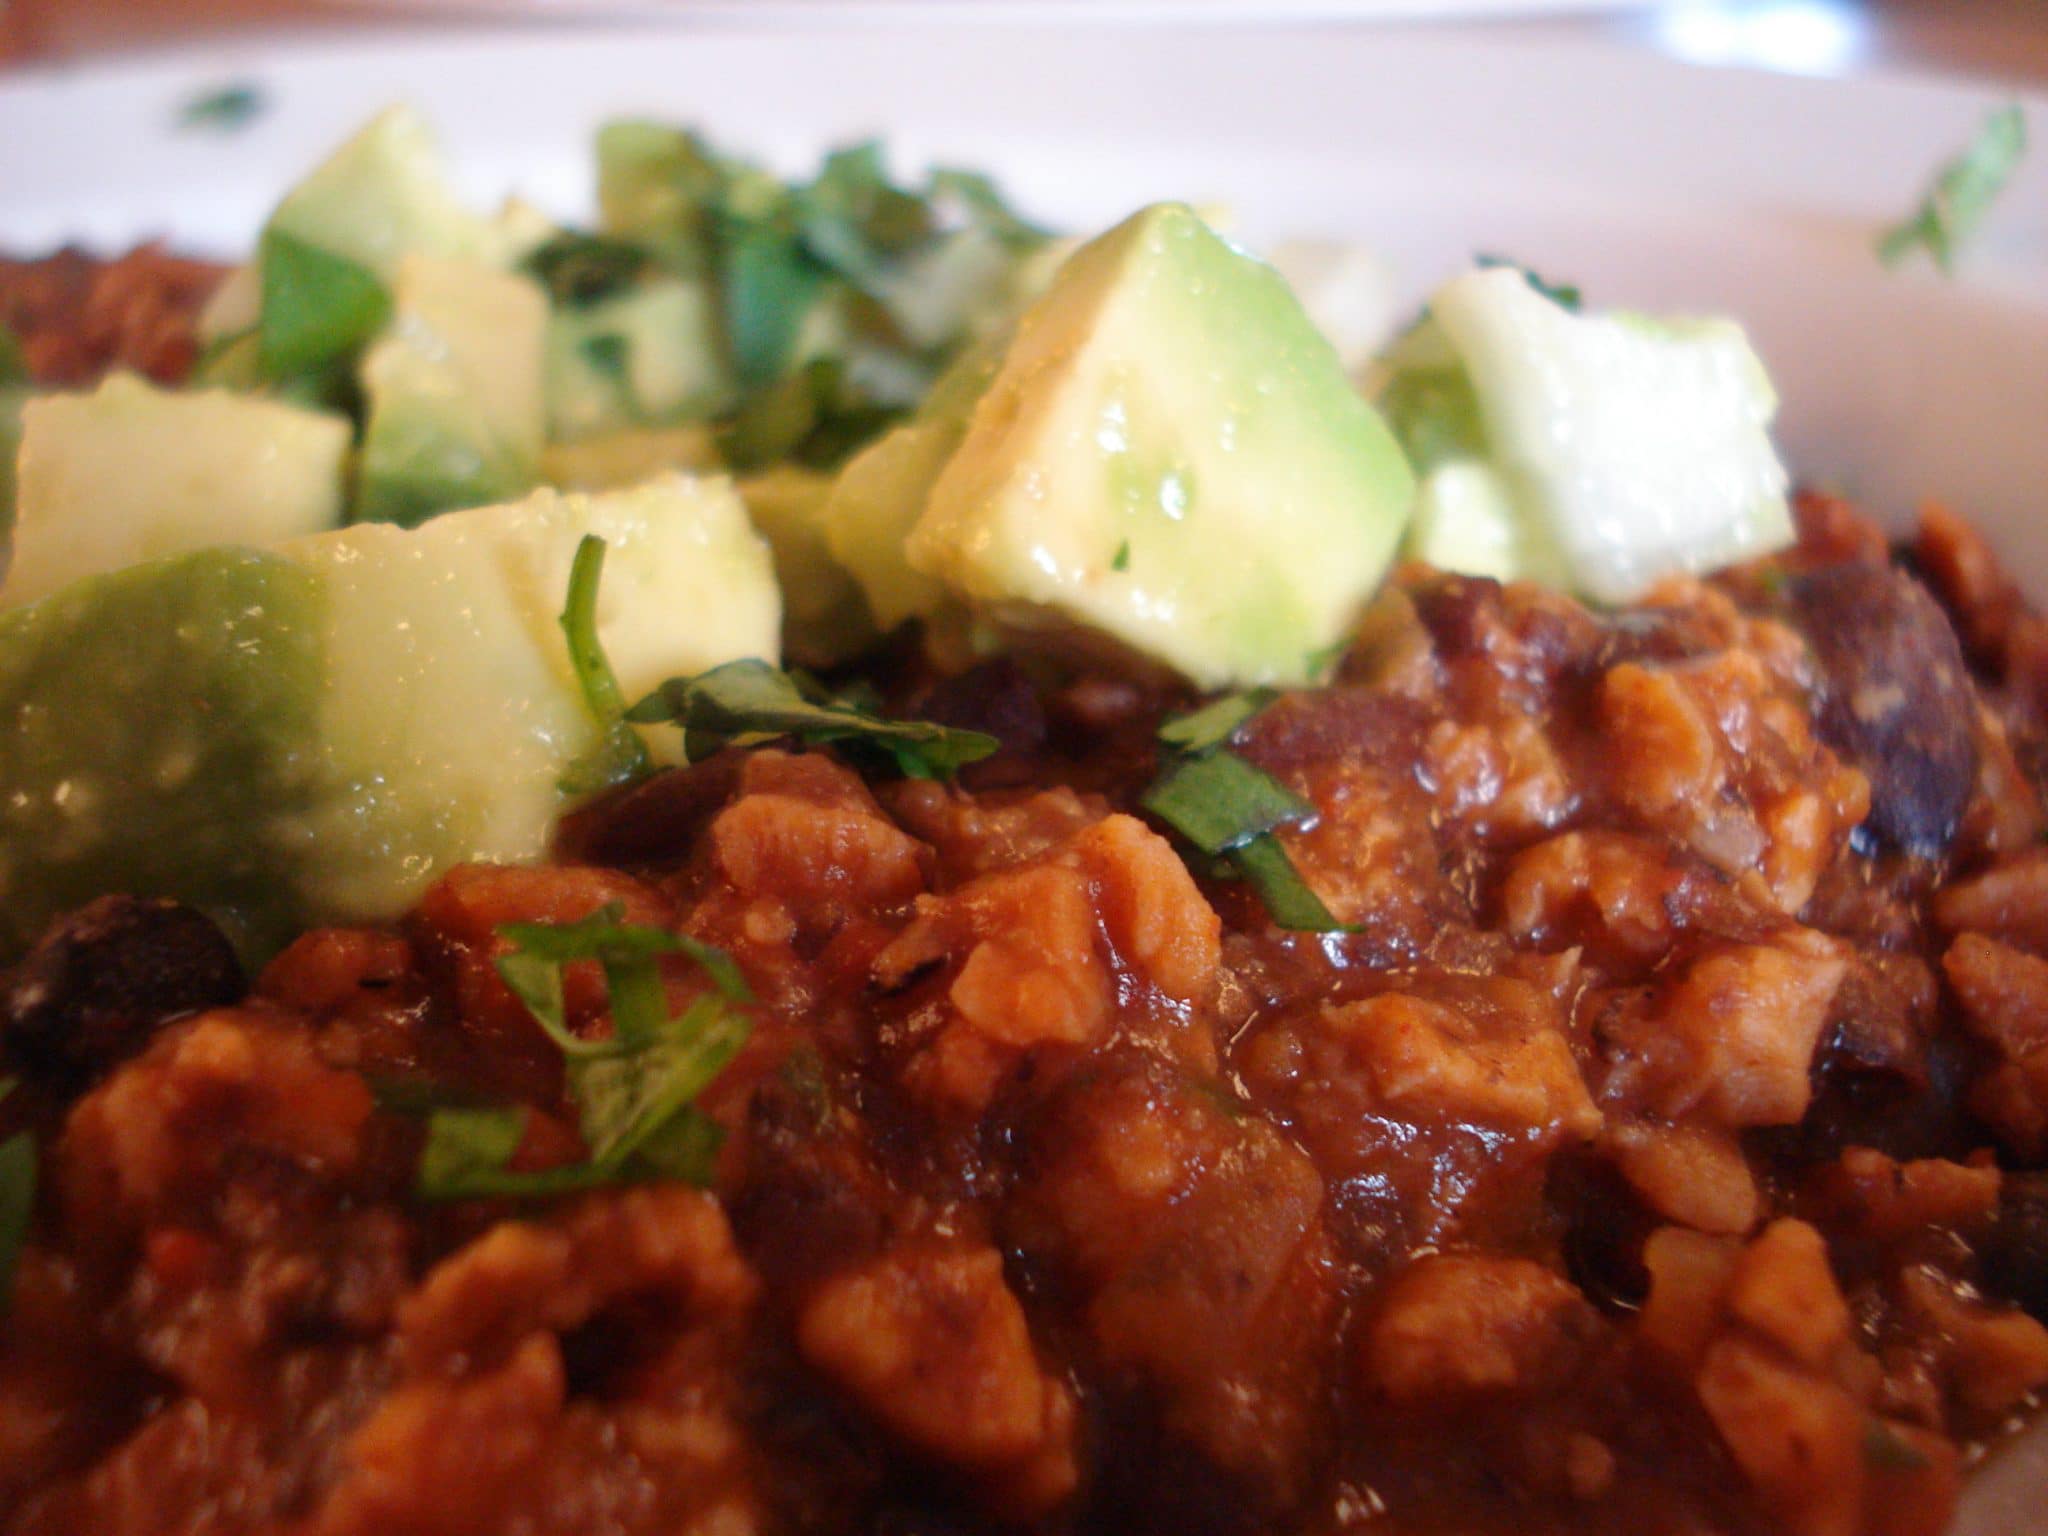 Close up of Smoky Chipotle Chili with Black Beans and TVP topped with avocado